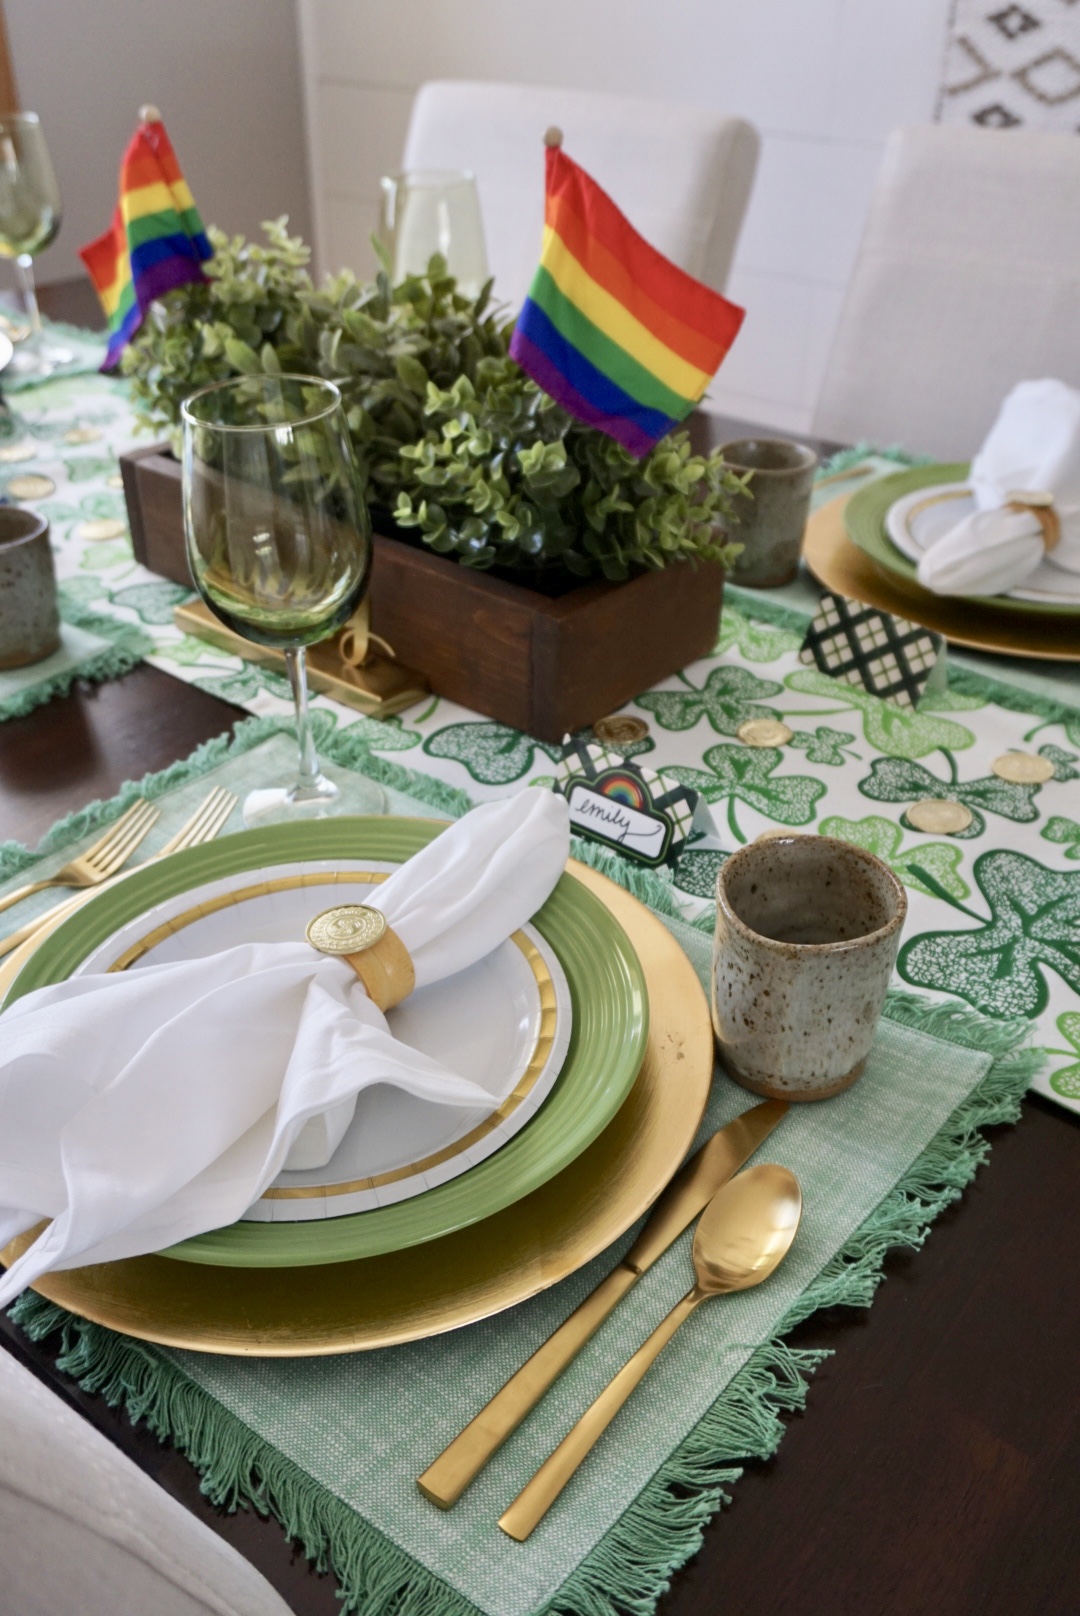  St. Patrick’s Day place setting on a budget with items from Target, Dollar Tree, and thrift stores! 